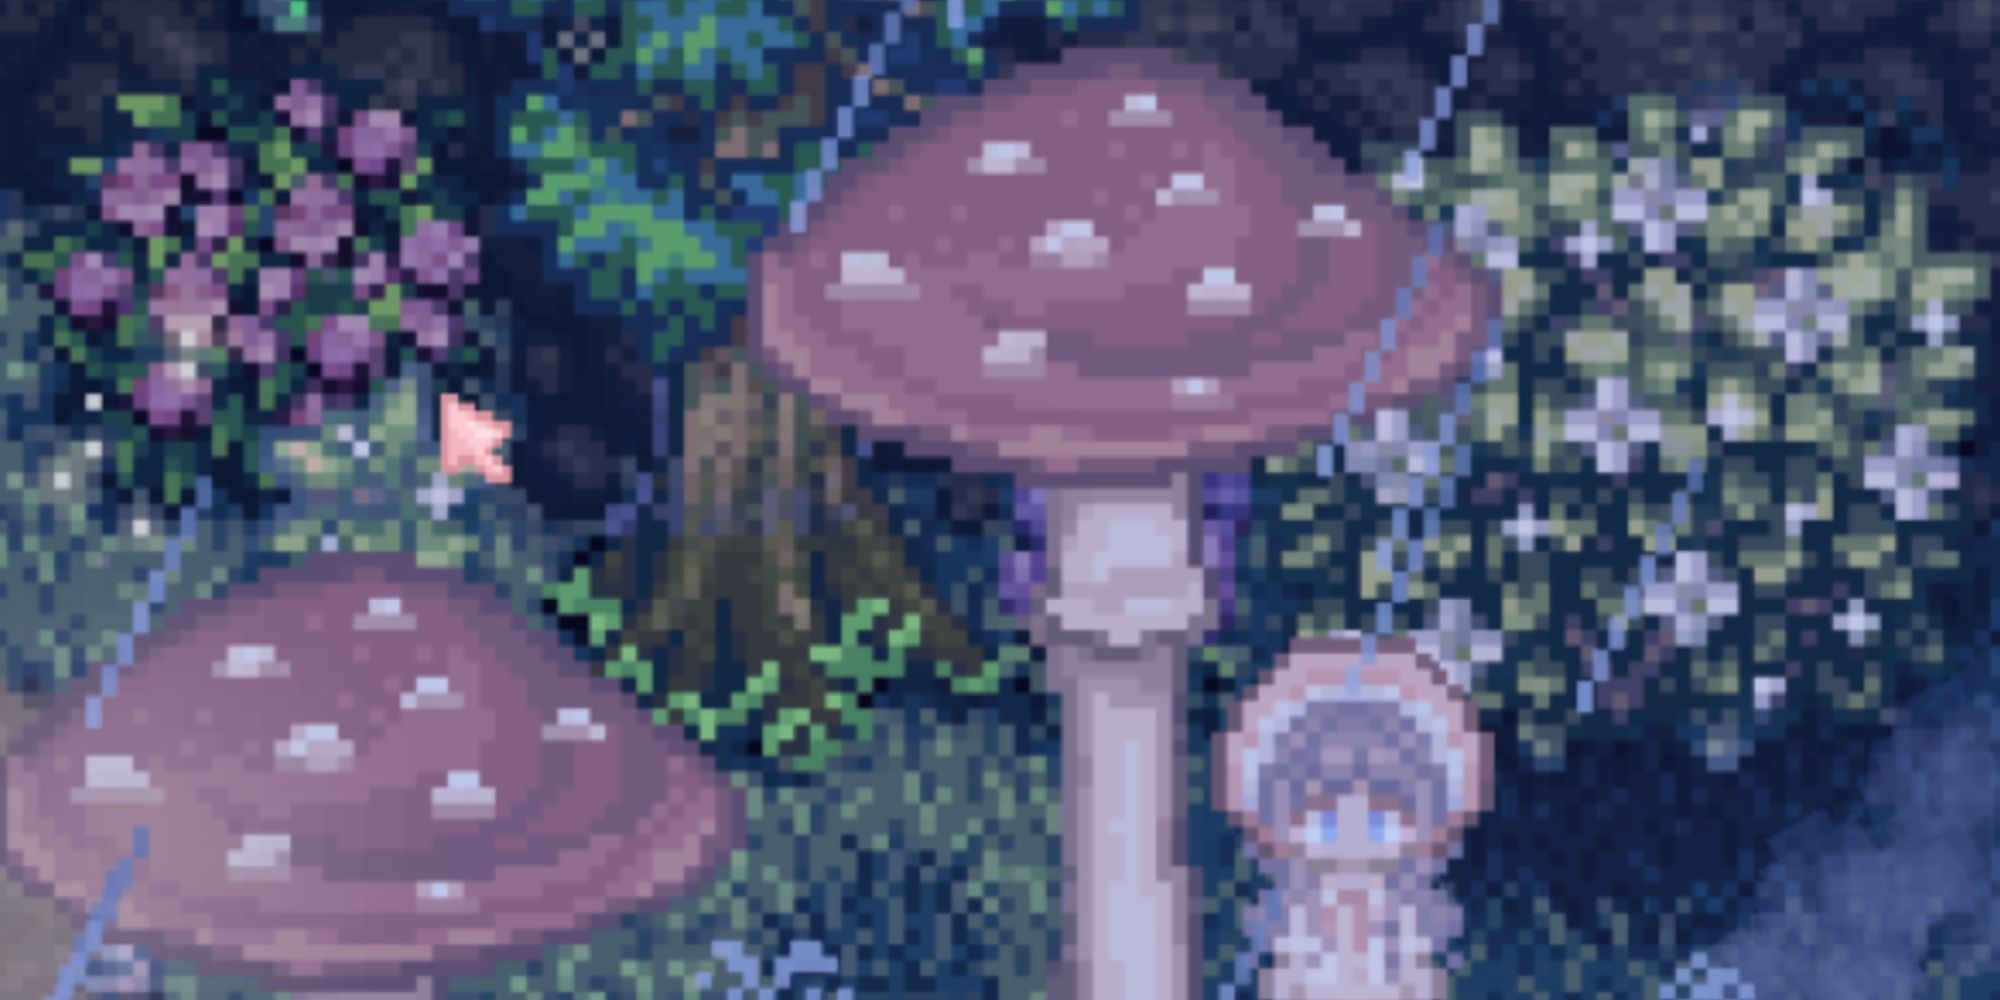 A modded version of the mushroom tree in Stardew Valley